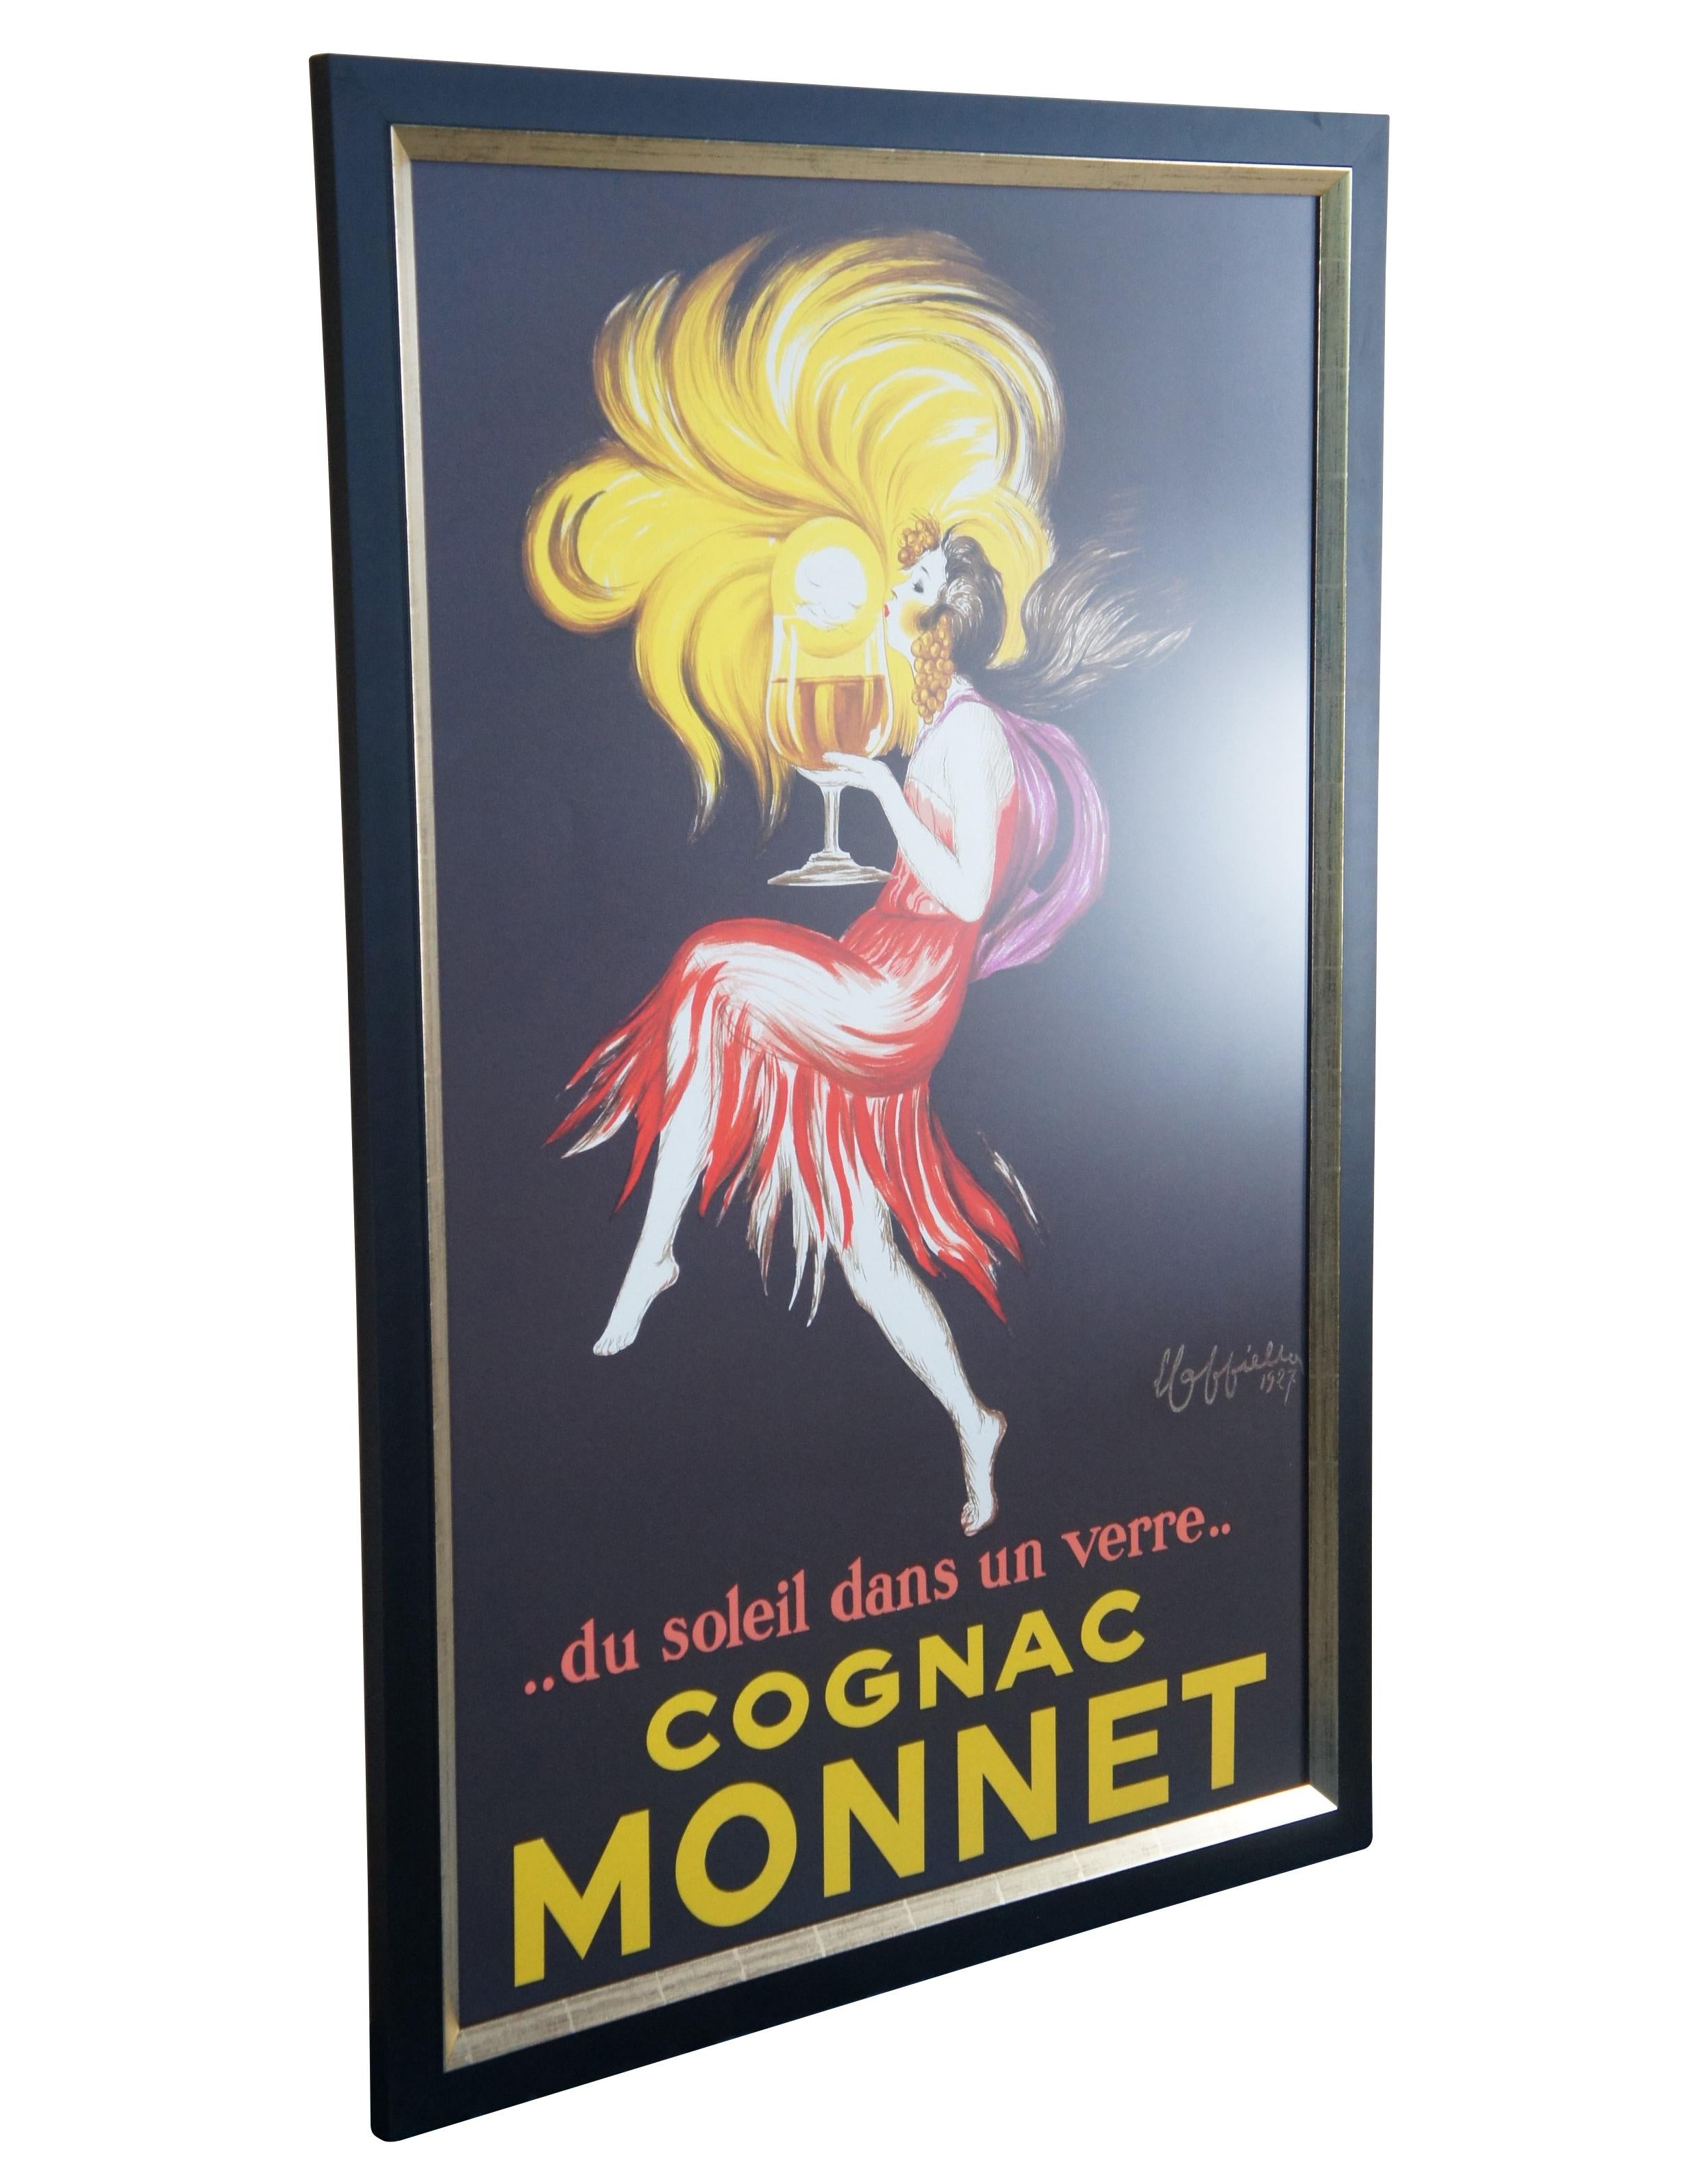 Vintage Cognac Monnet poster by Leonetto Cappiello.

Featuring a sun in the glass, this poster by Cappiello visually represents the warmth of the drink as sunshine bursts out of the glass. The text below 